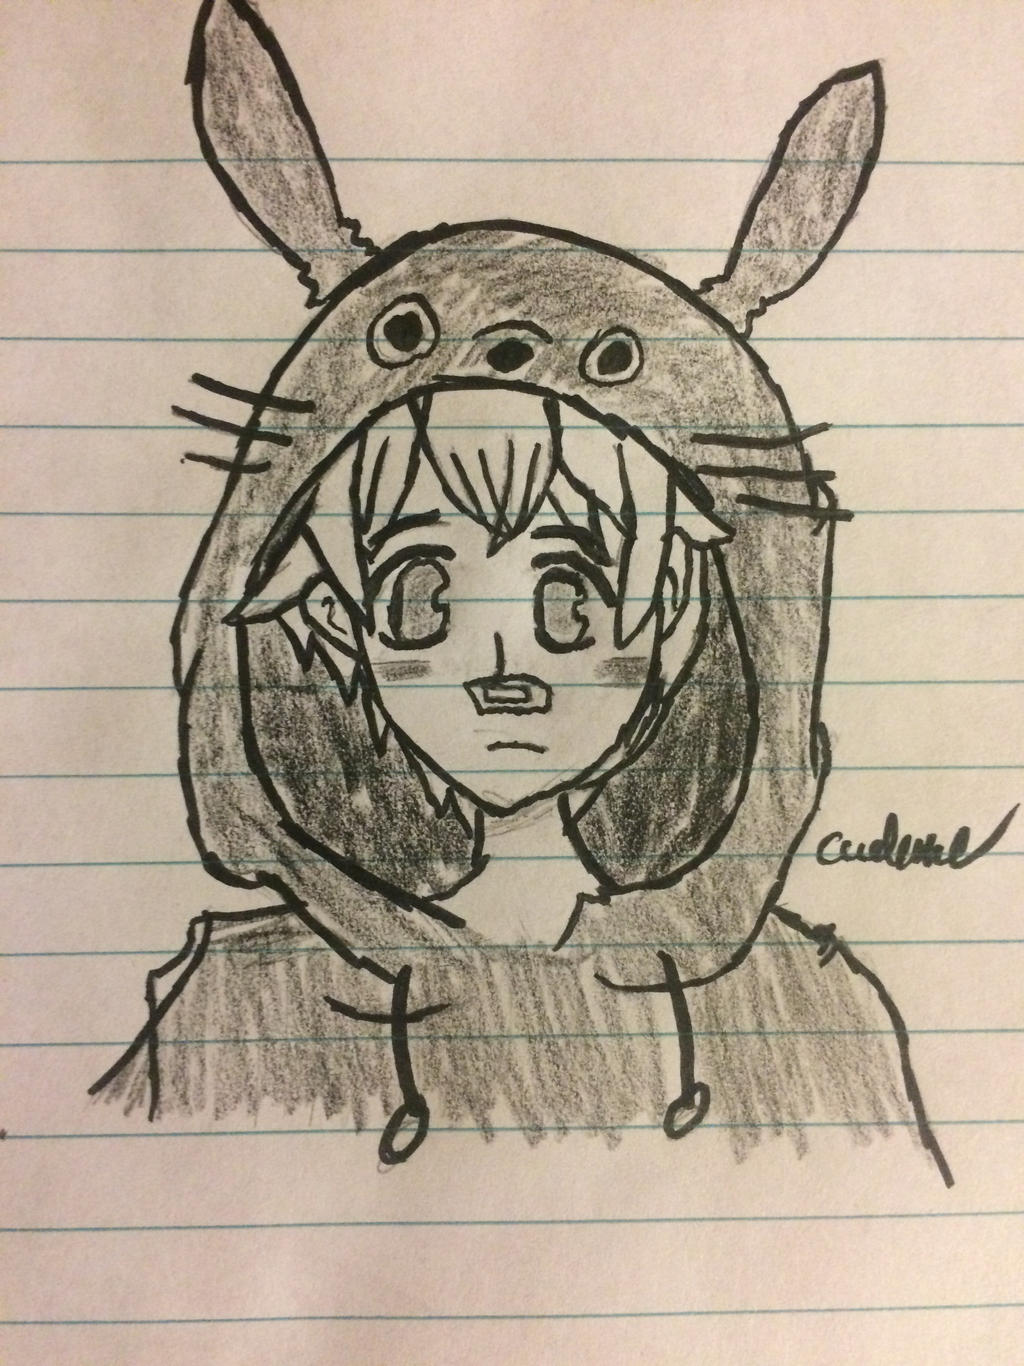 Anime boy in hoodie by Cadence1928 on DeviantArt